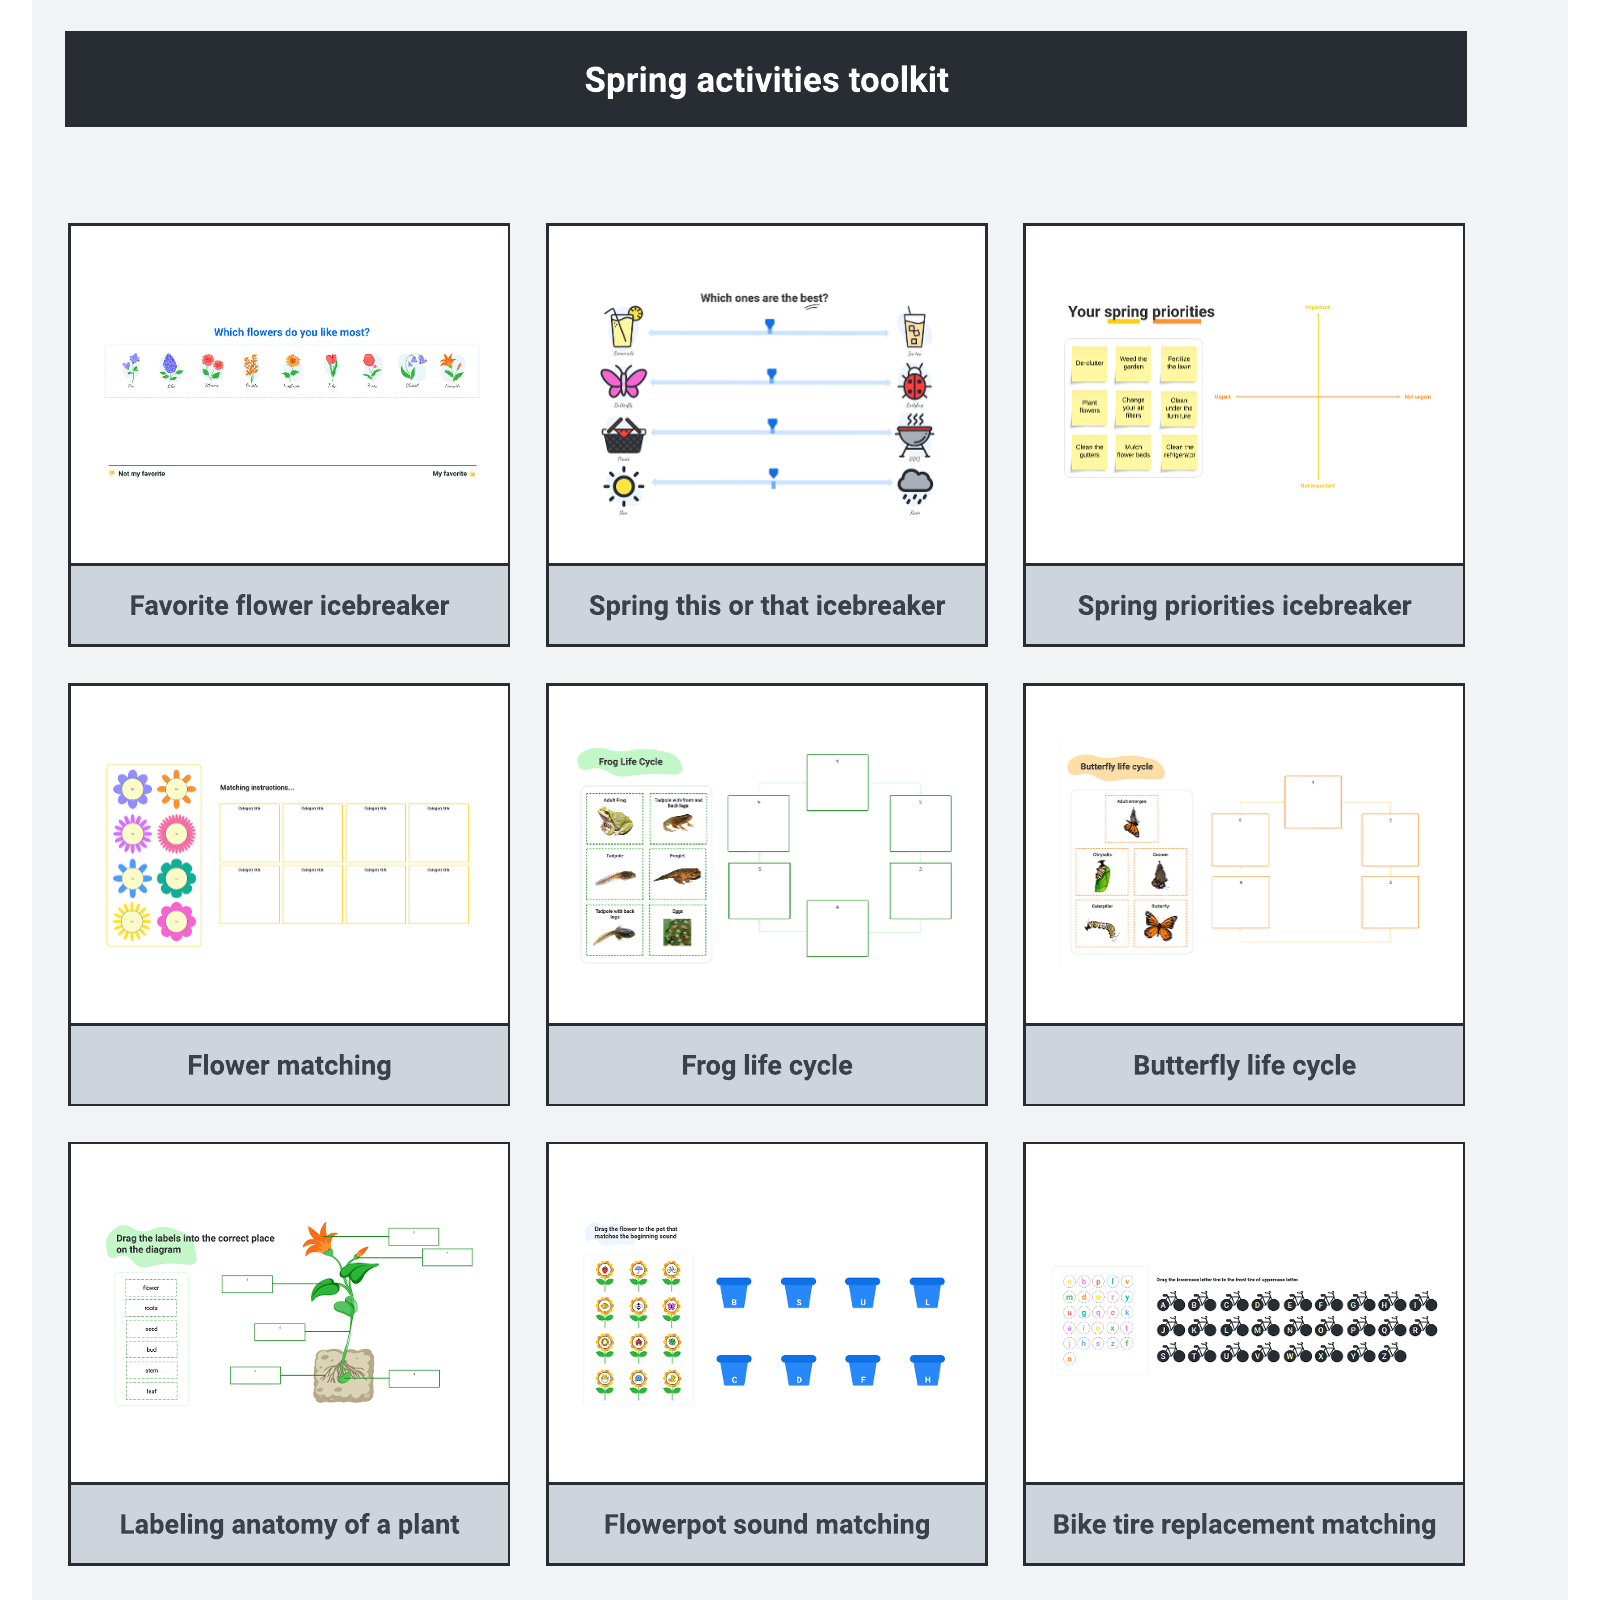 Spring activities toolkit example